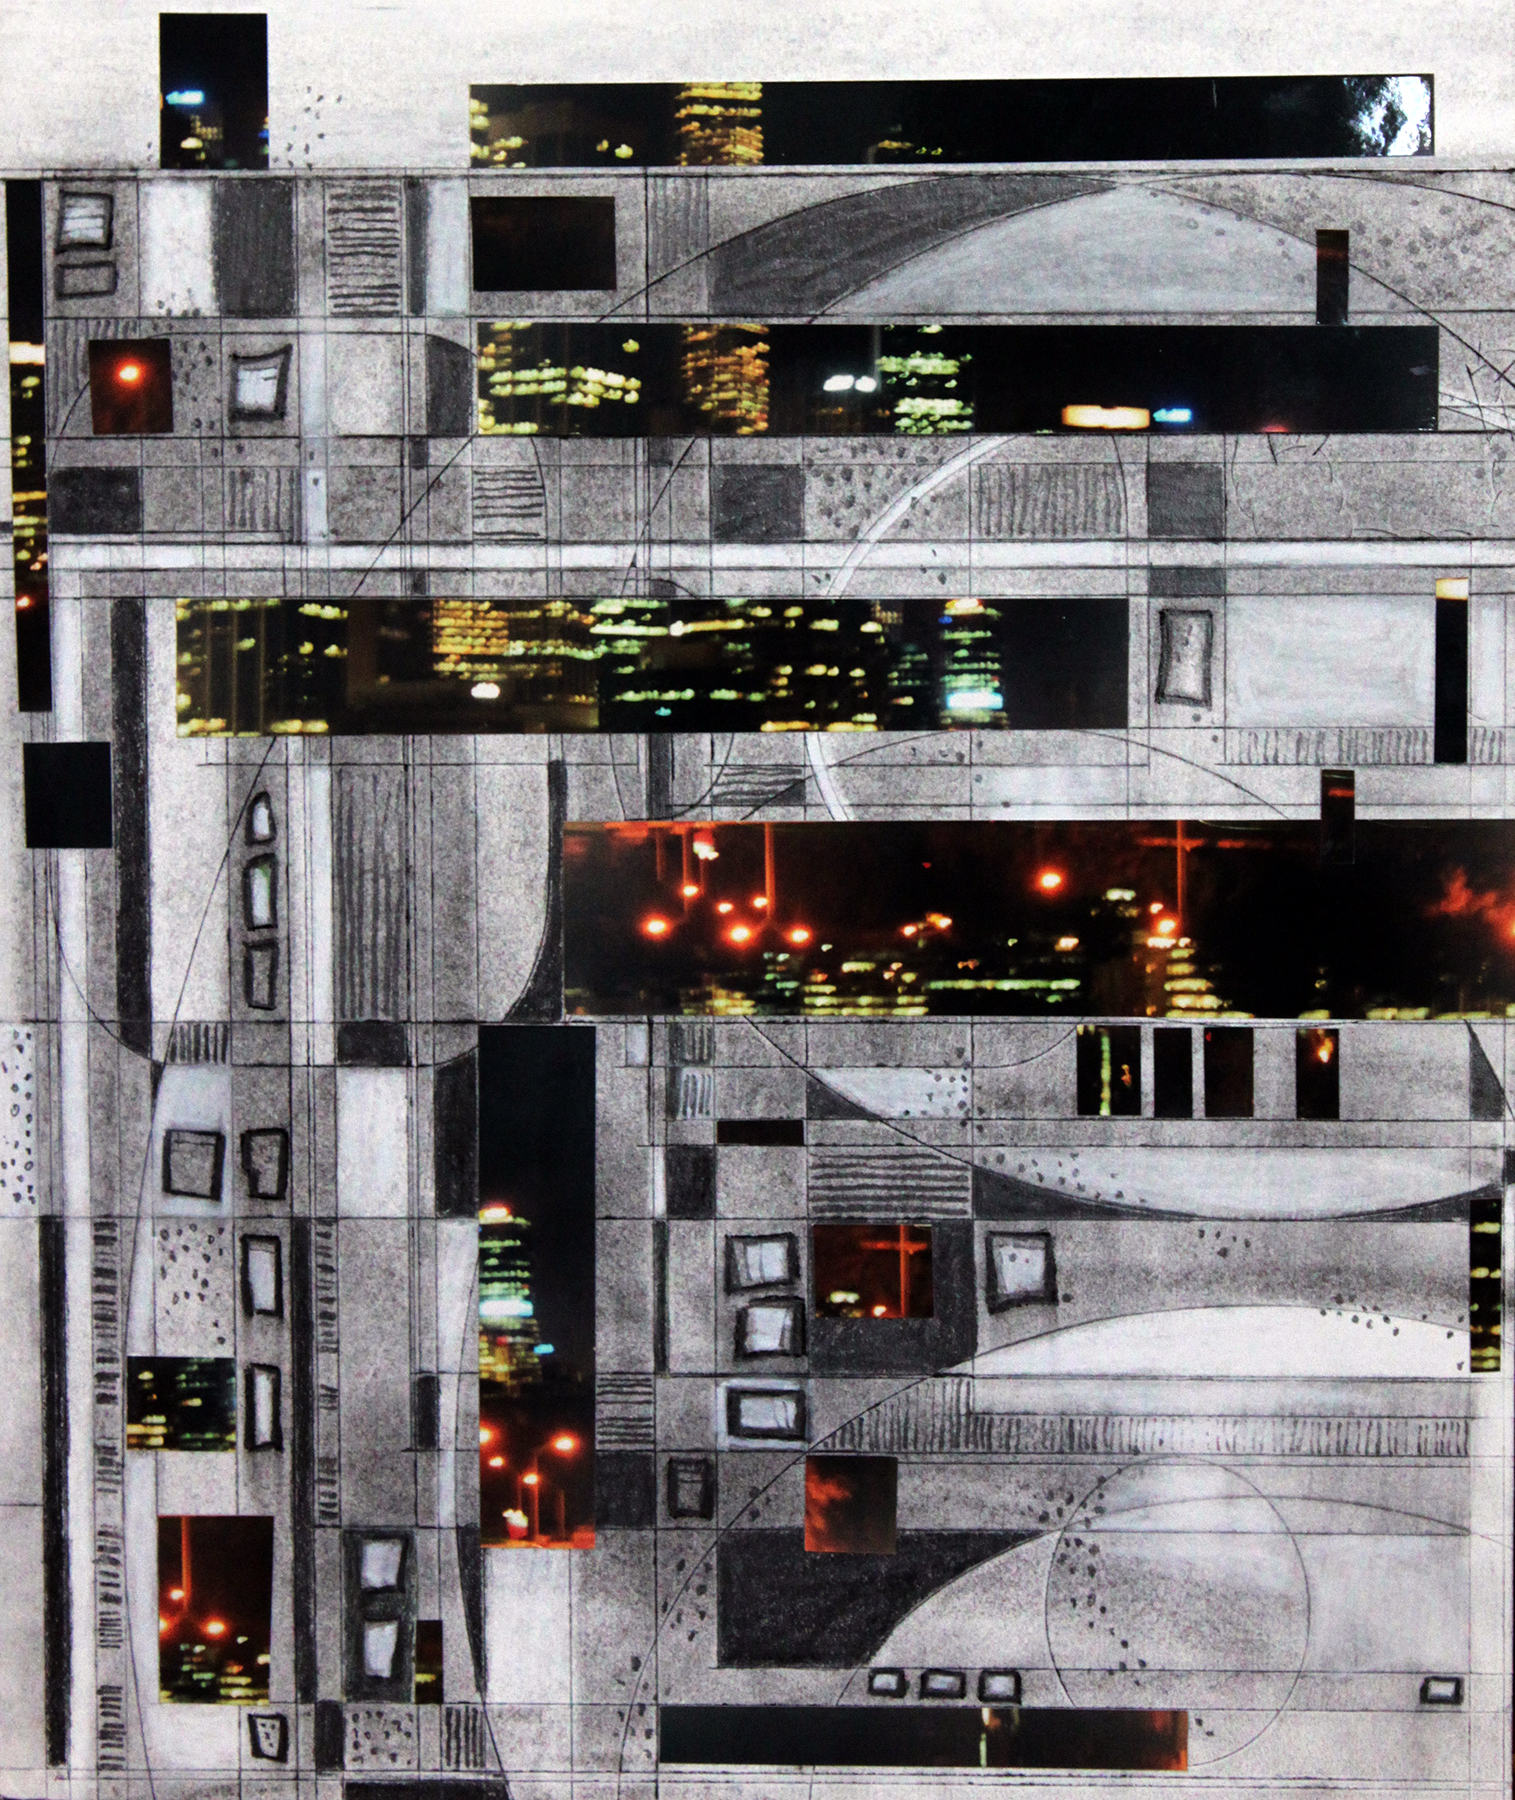  TITLE:&nbsp; A night in the city  MEDIUM: Collage and drawing DIMENSIONS: H51 x W44cm  FRAMED 